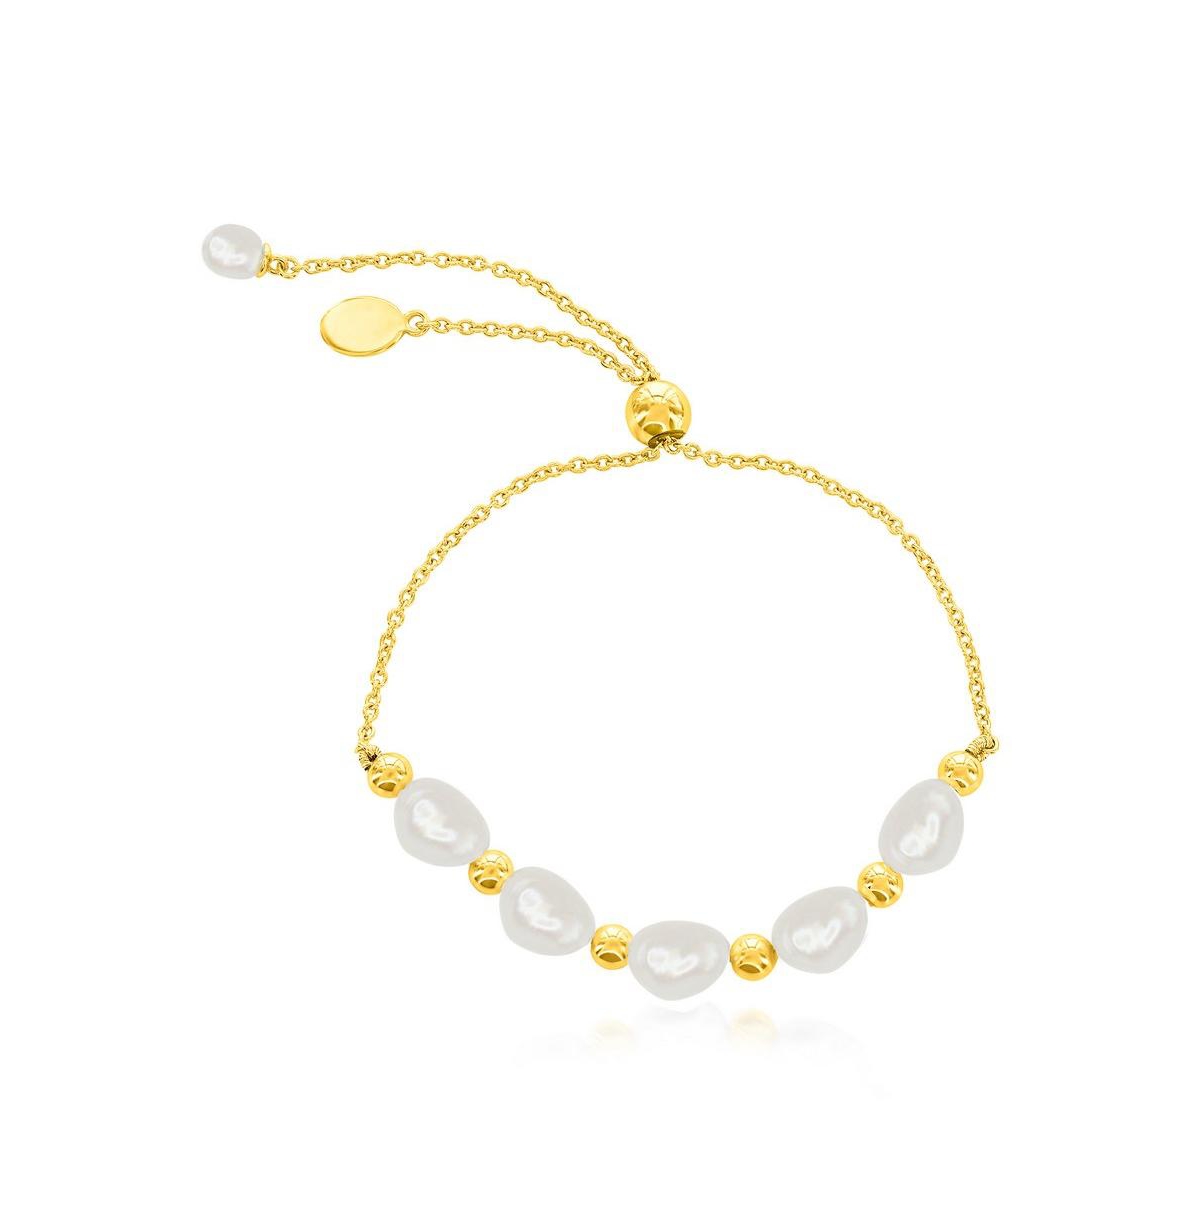 Sterling Silver or Gold Plated Over Sterling Silver Freshwater Pearl Bead Adjustable Bolo Bracelet - Gold